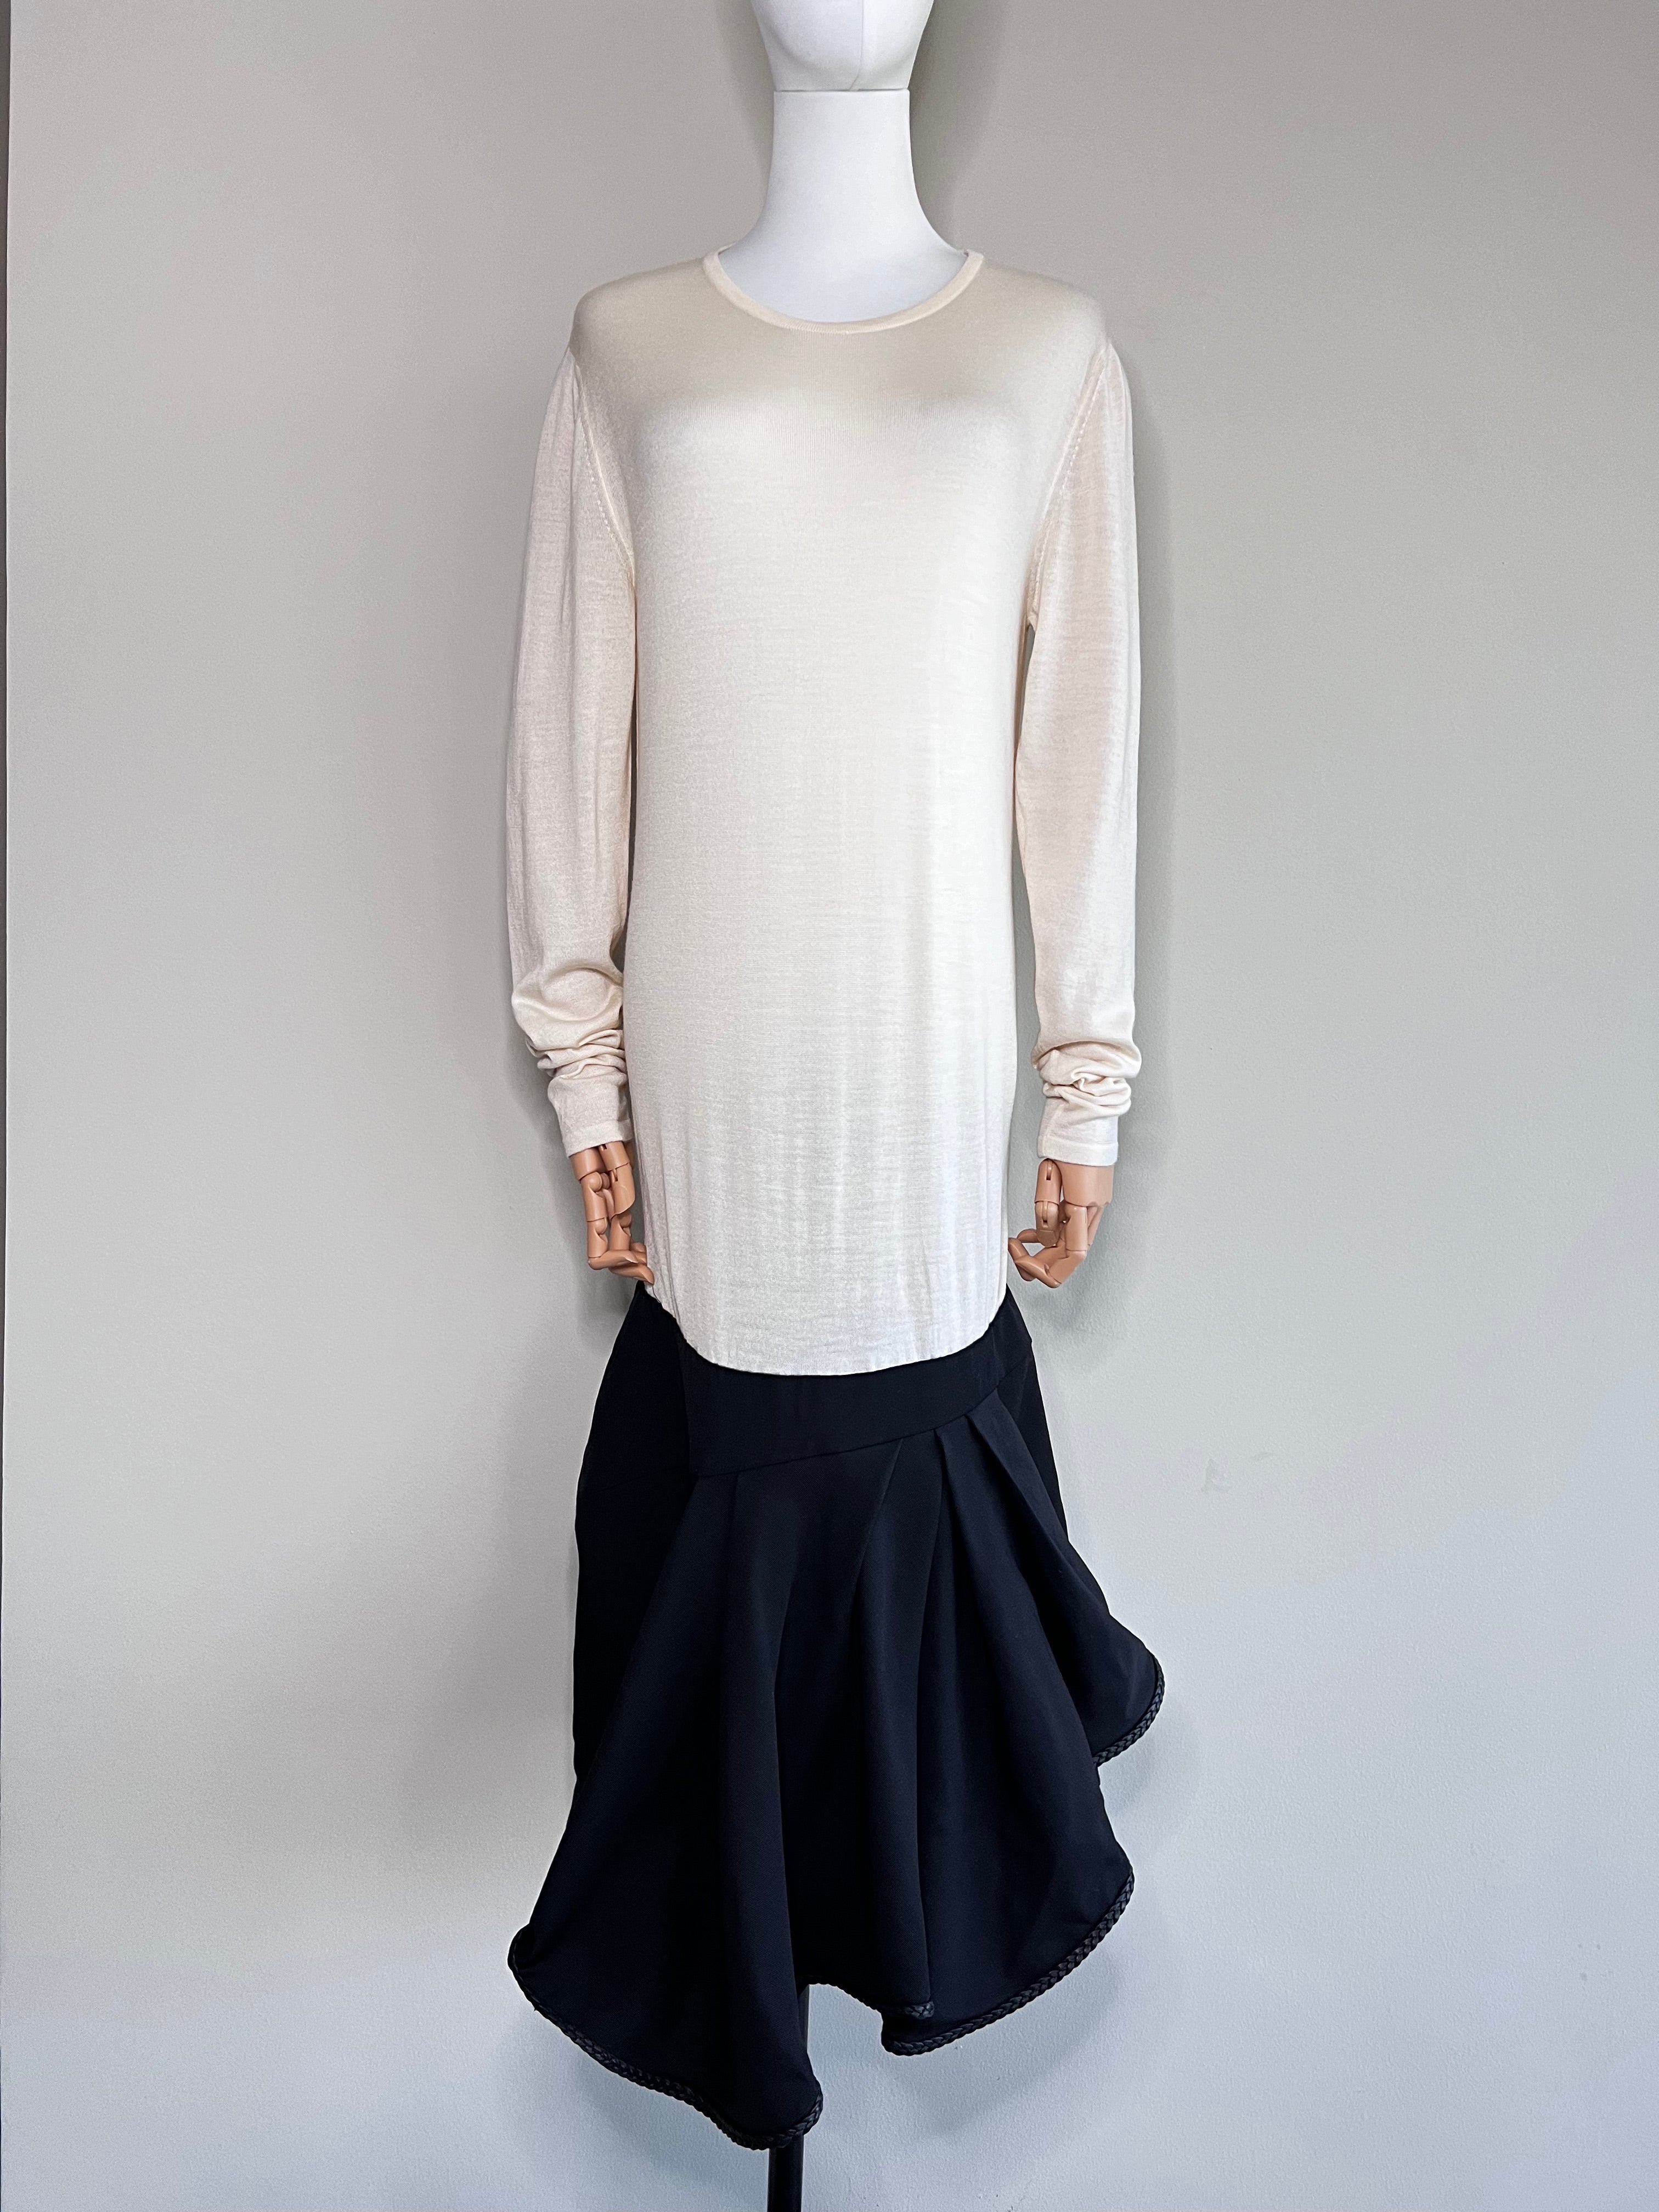 Off white long sleeve with black pleated bottom dress - JAY AHR